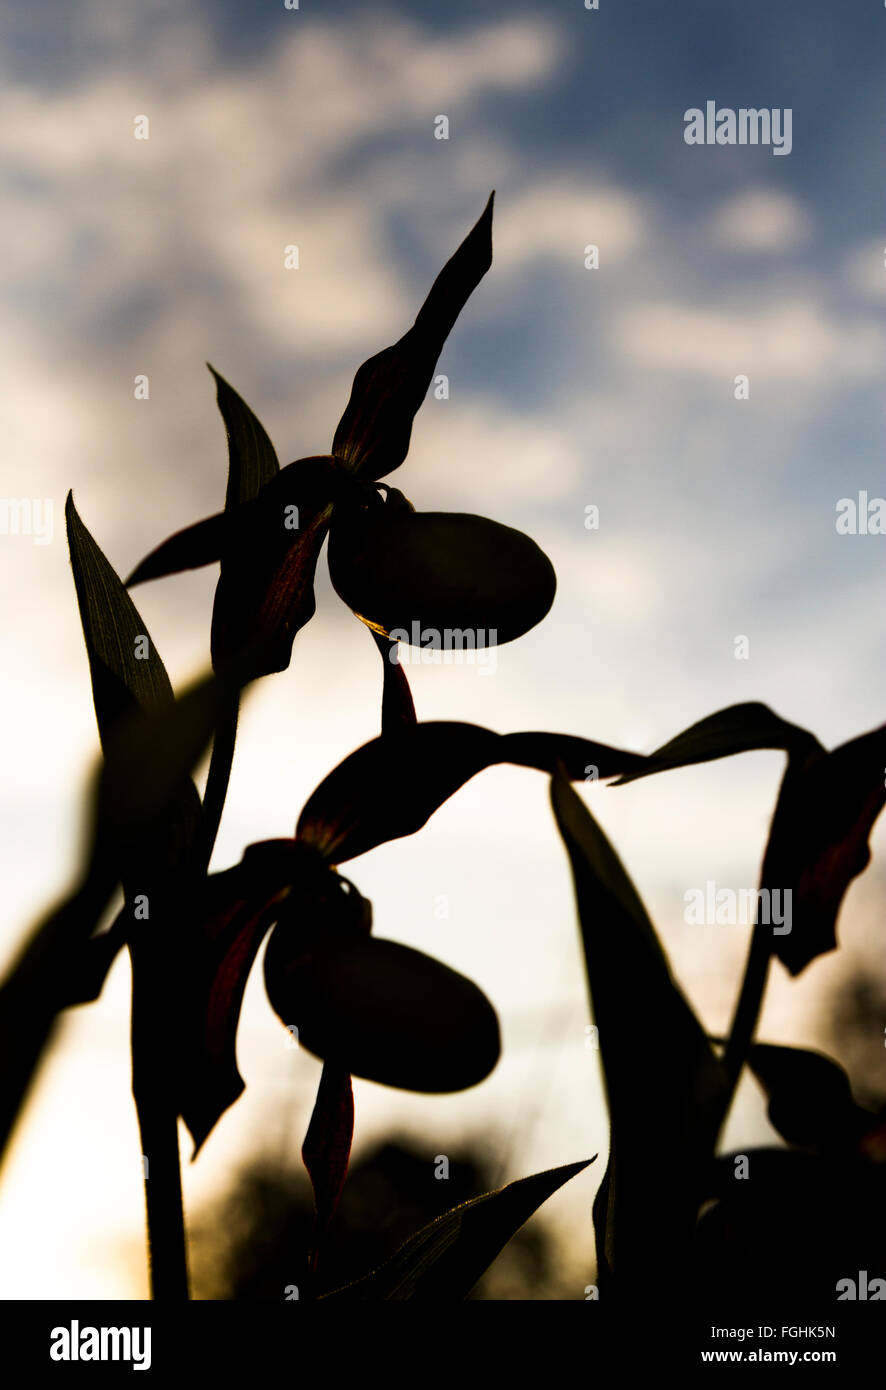 Lady's slipper orchid in full bloom in spring, silhouette against cloudy sky, portrait orientation Stock Photo